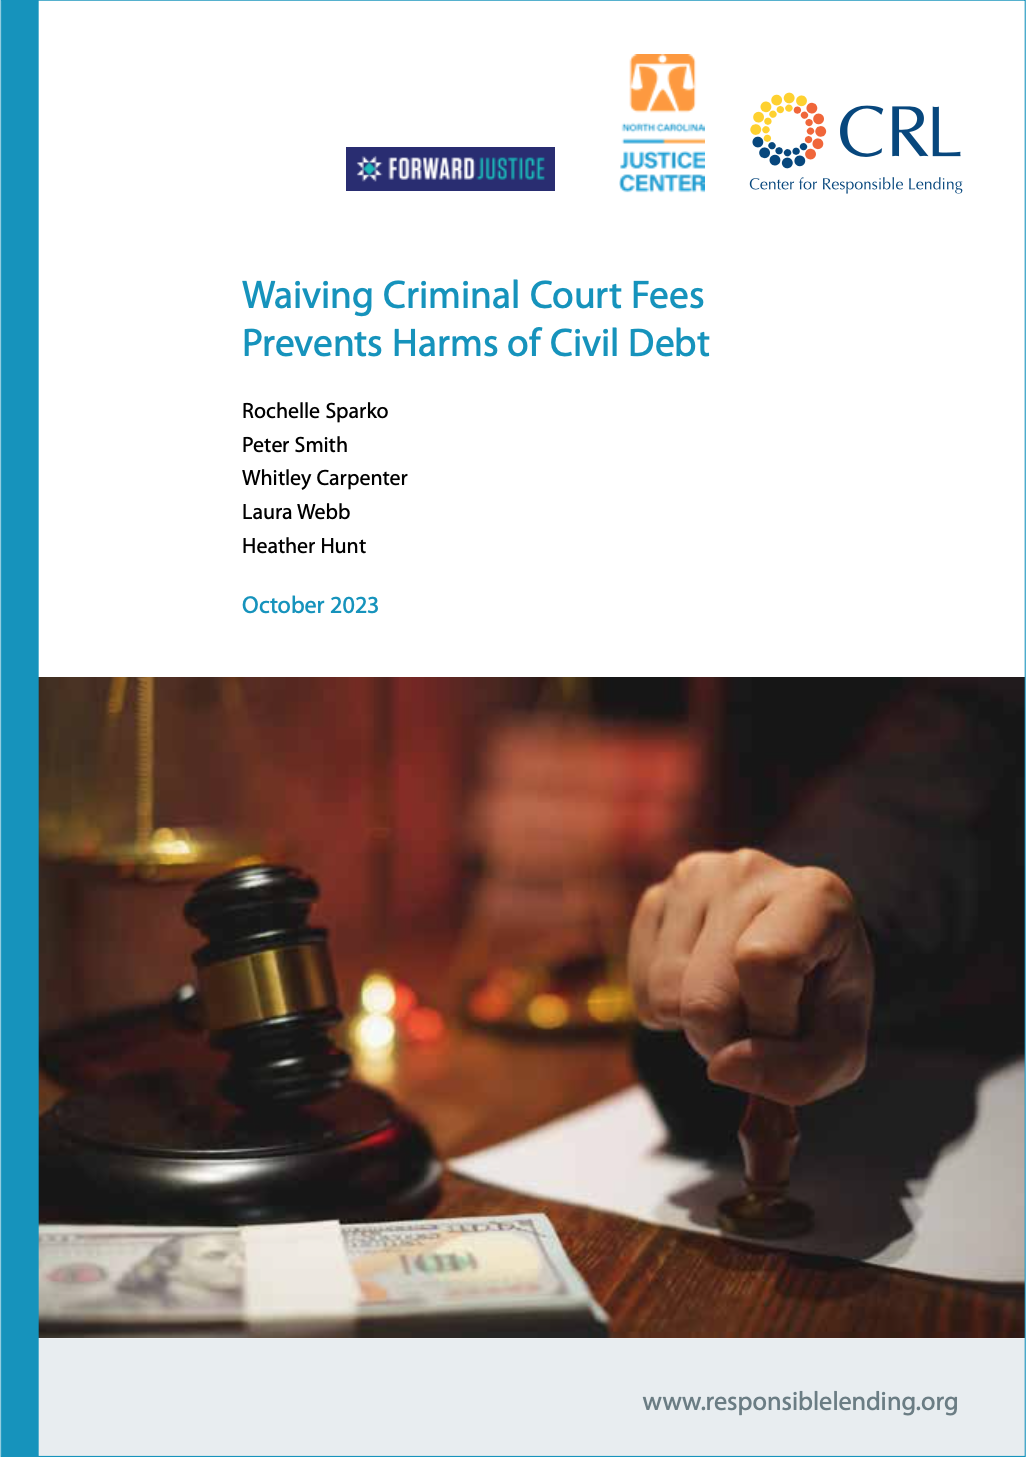 Waiving Criminal Court Fees Prevents Harms of Civil Debt